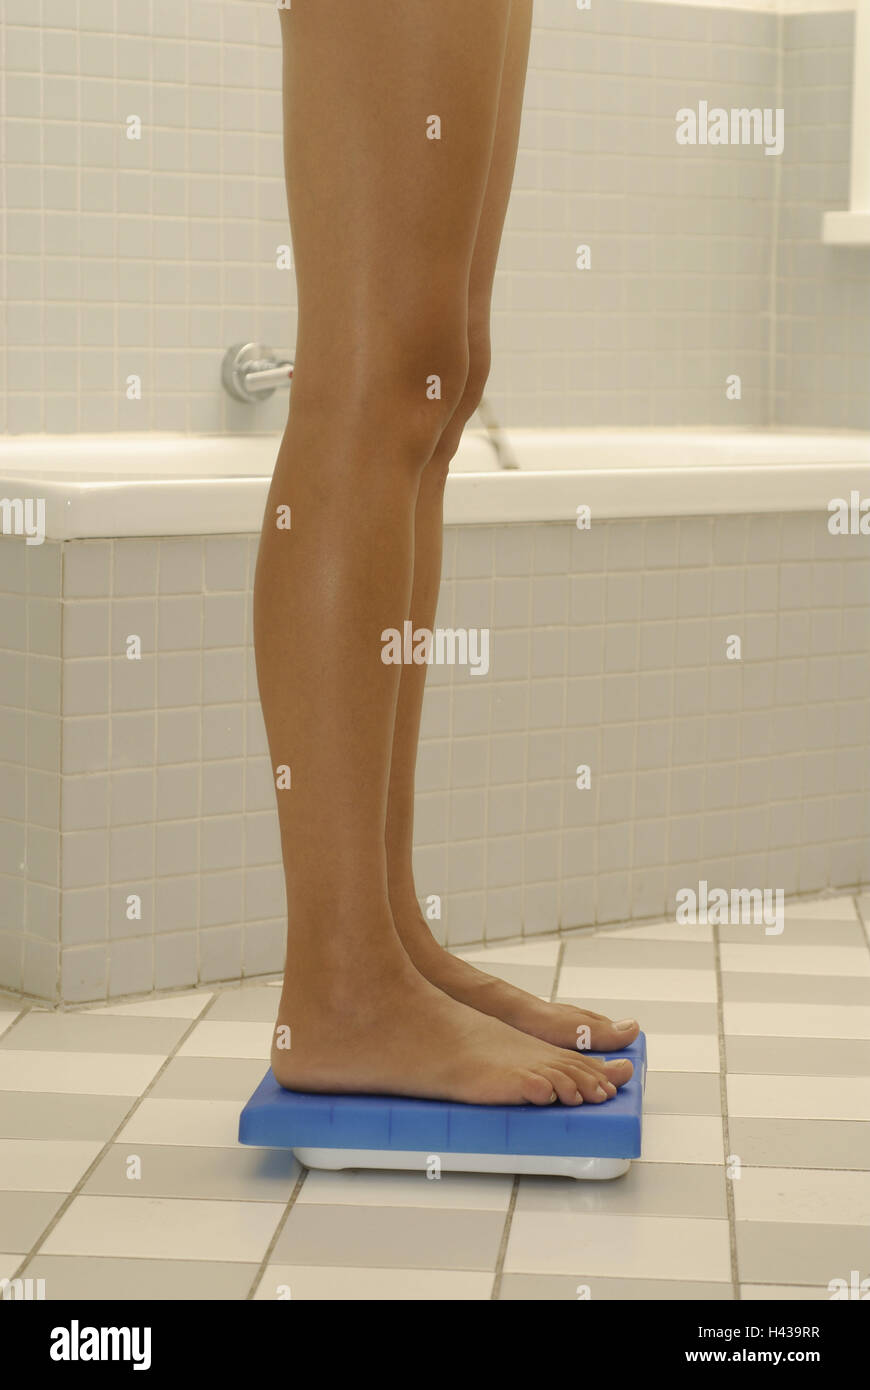 Bathrooms, woman, stand, bathroom scales, detail, feet, Stock Photo